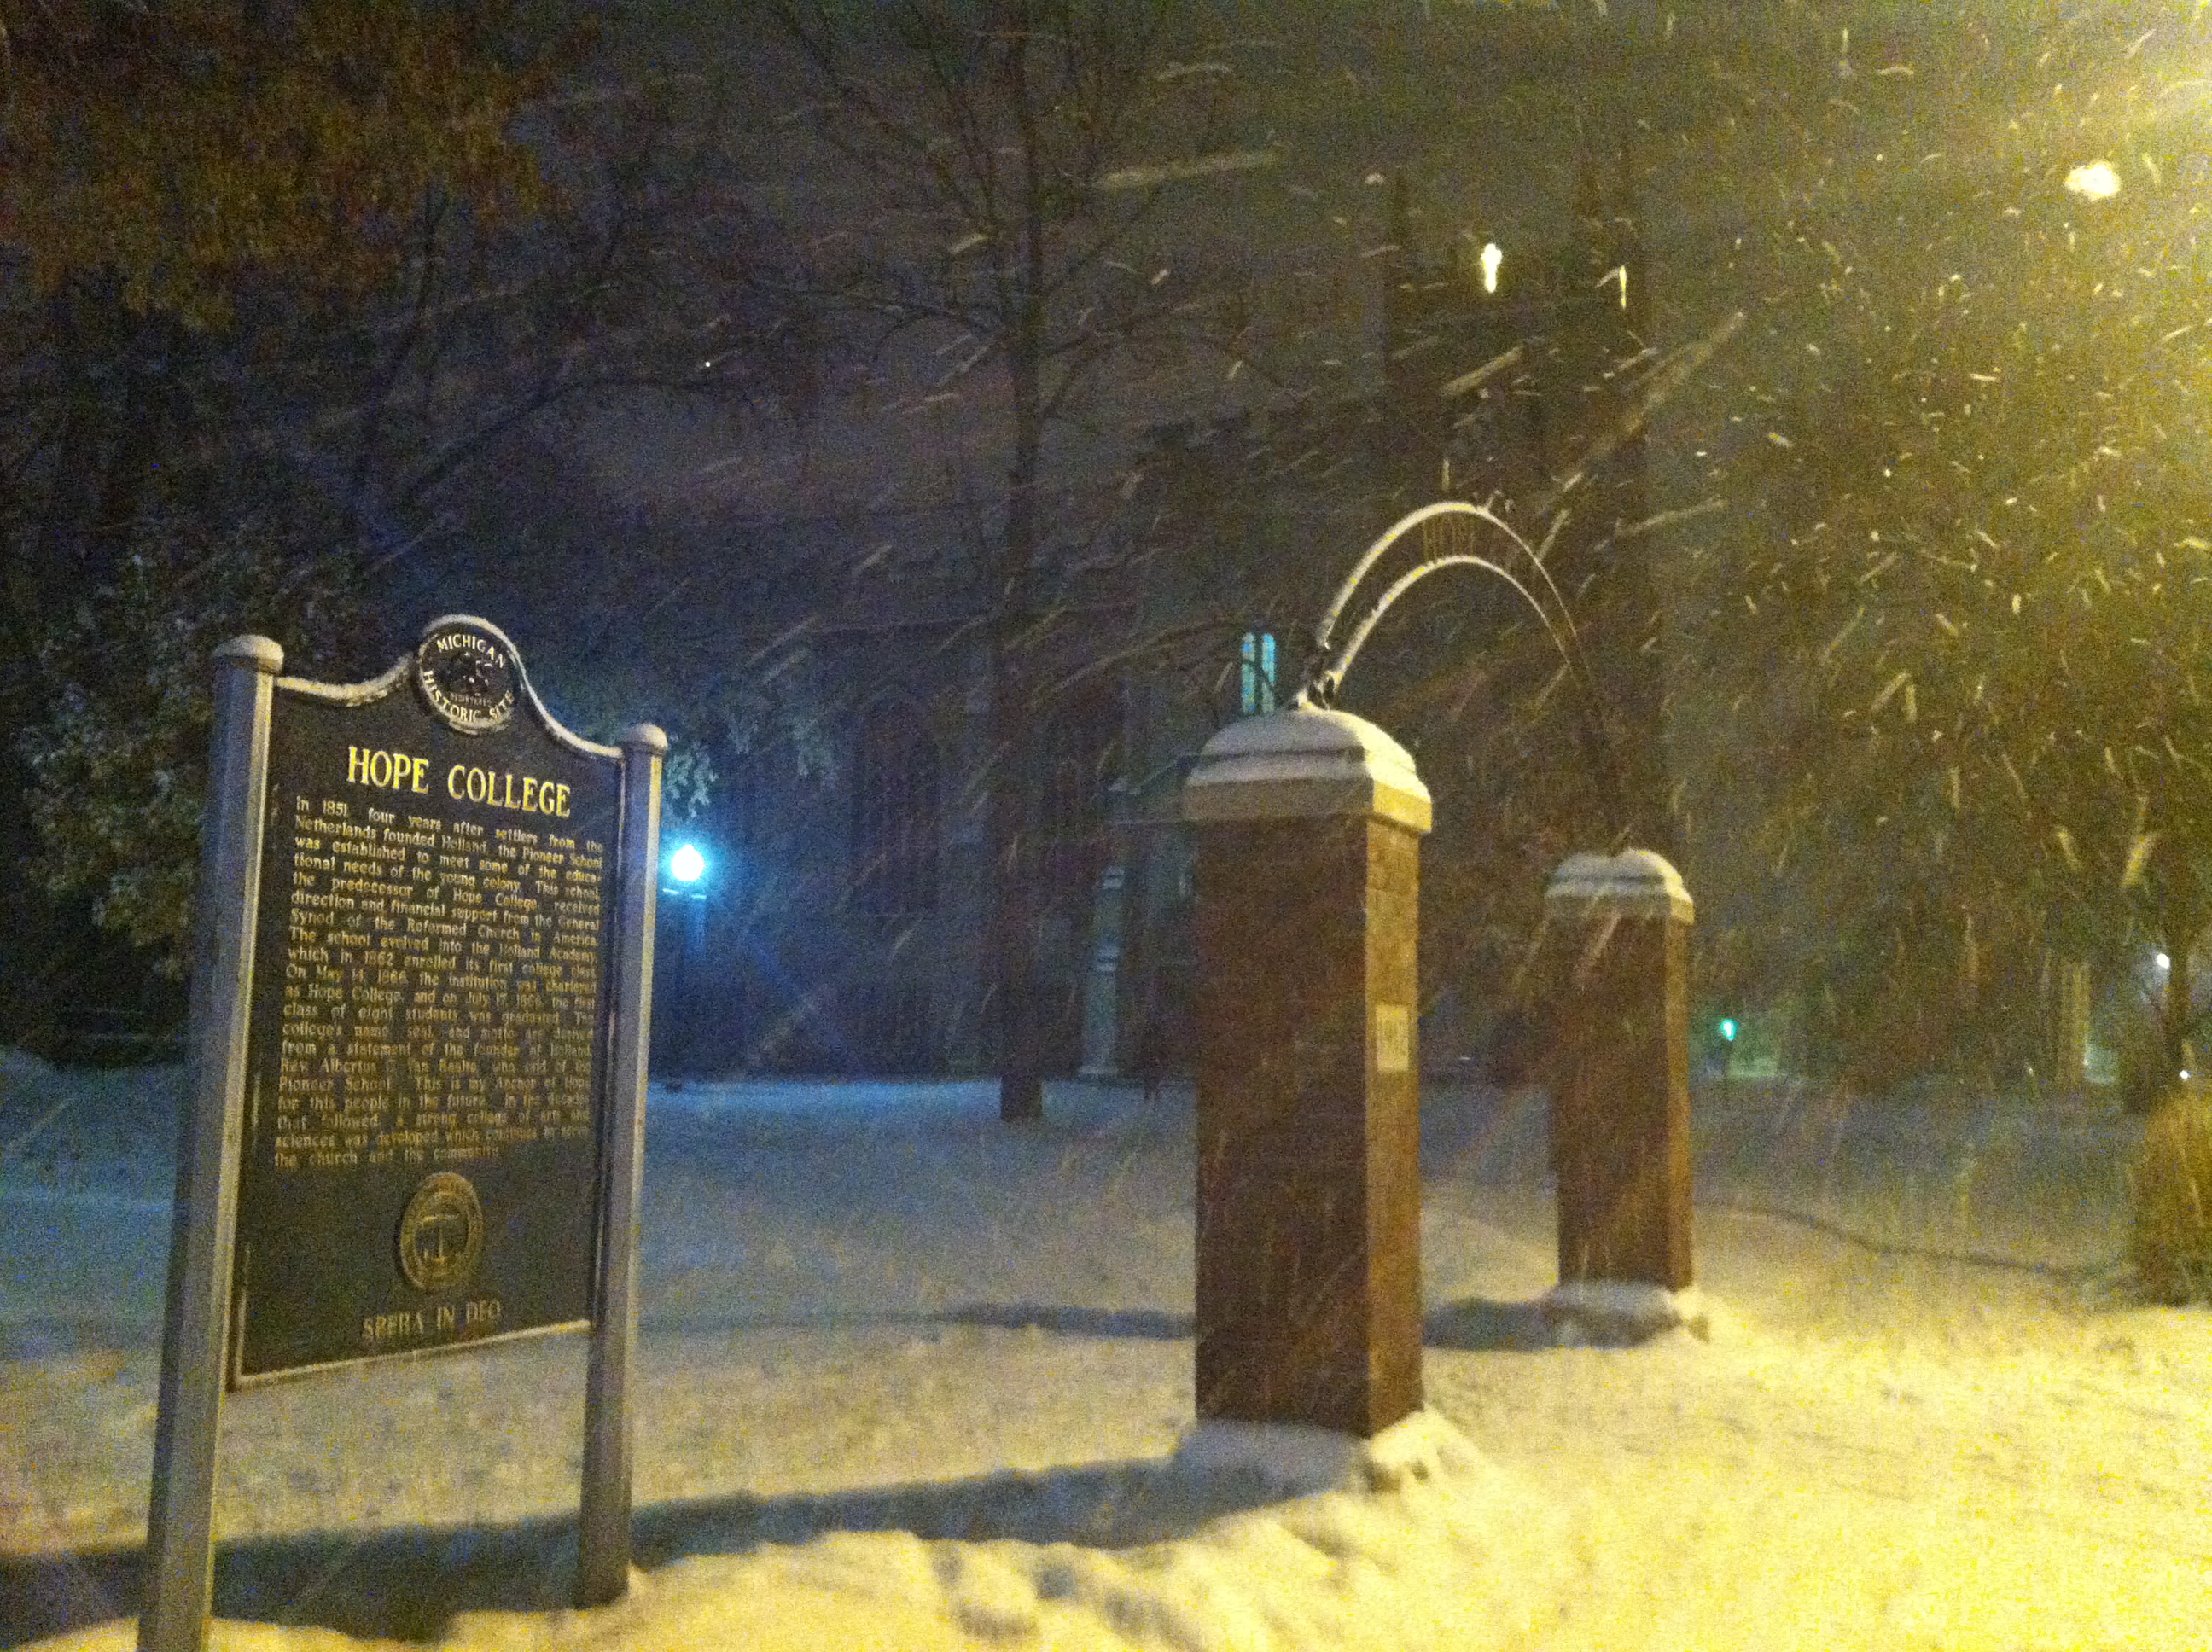 Snow swirling past the Hope College arch and sign